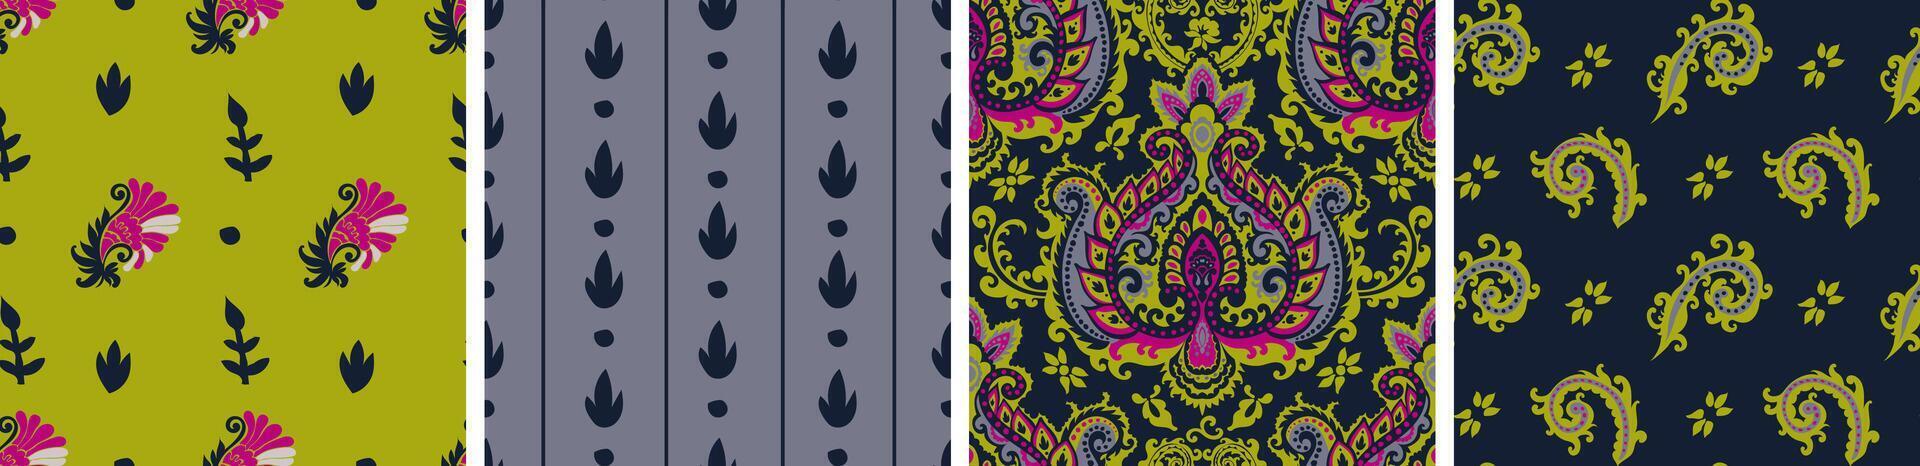 Paisley set of pattern collection vector